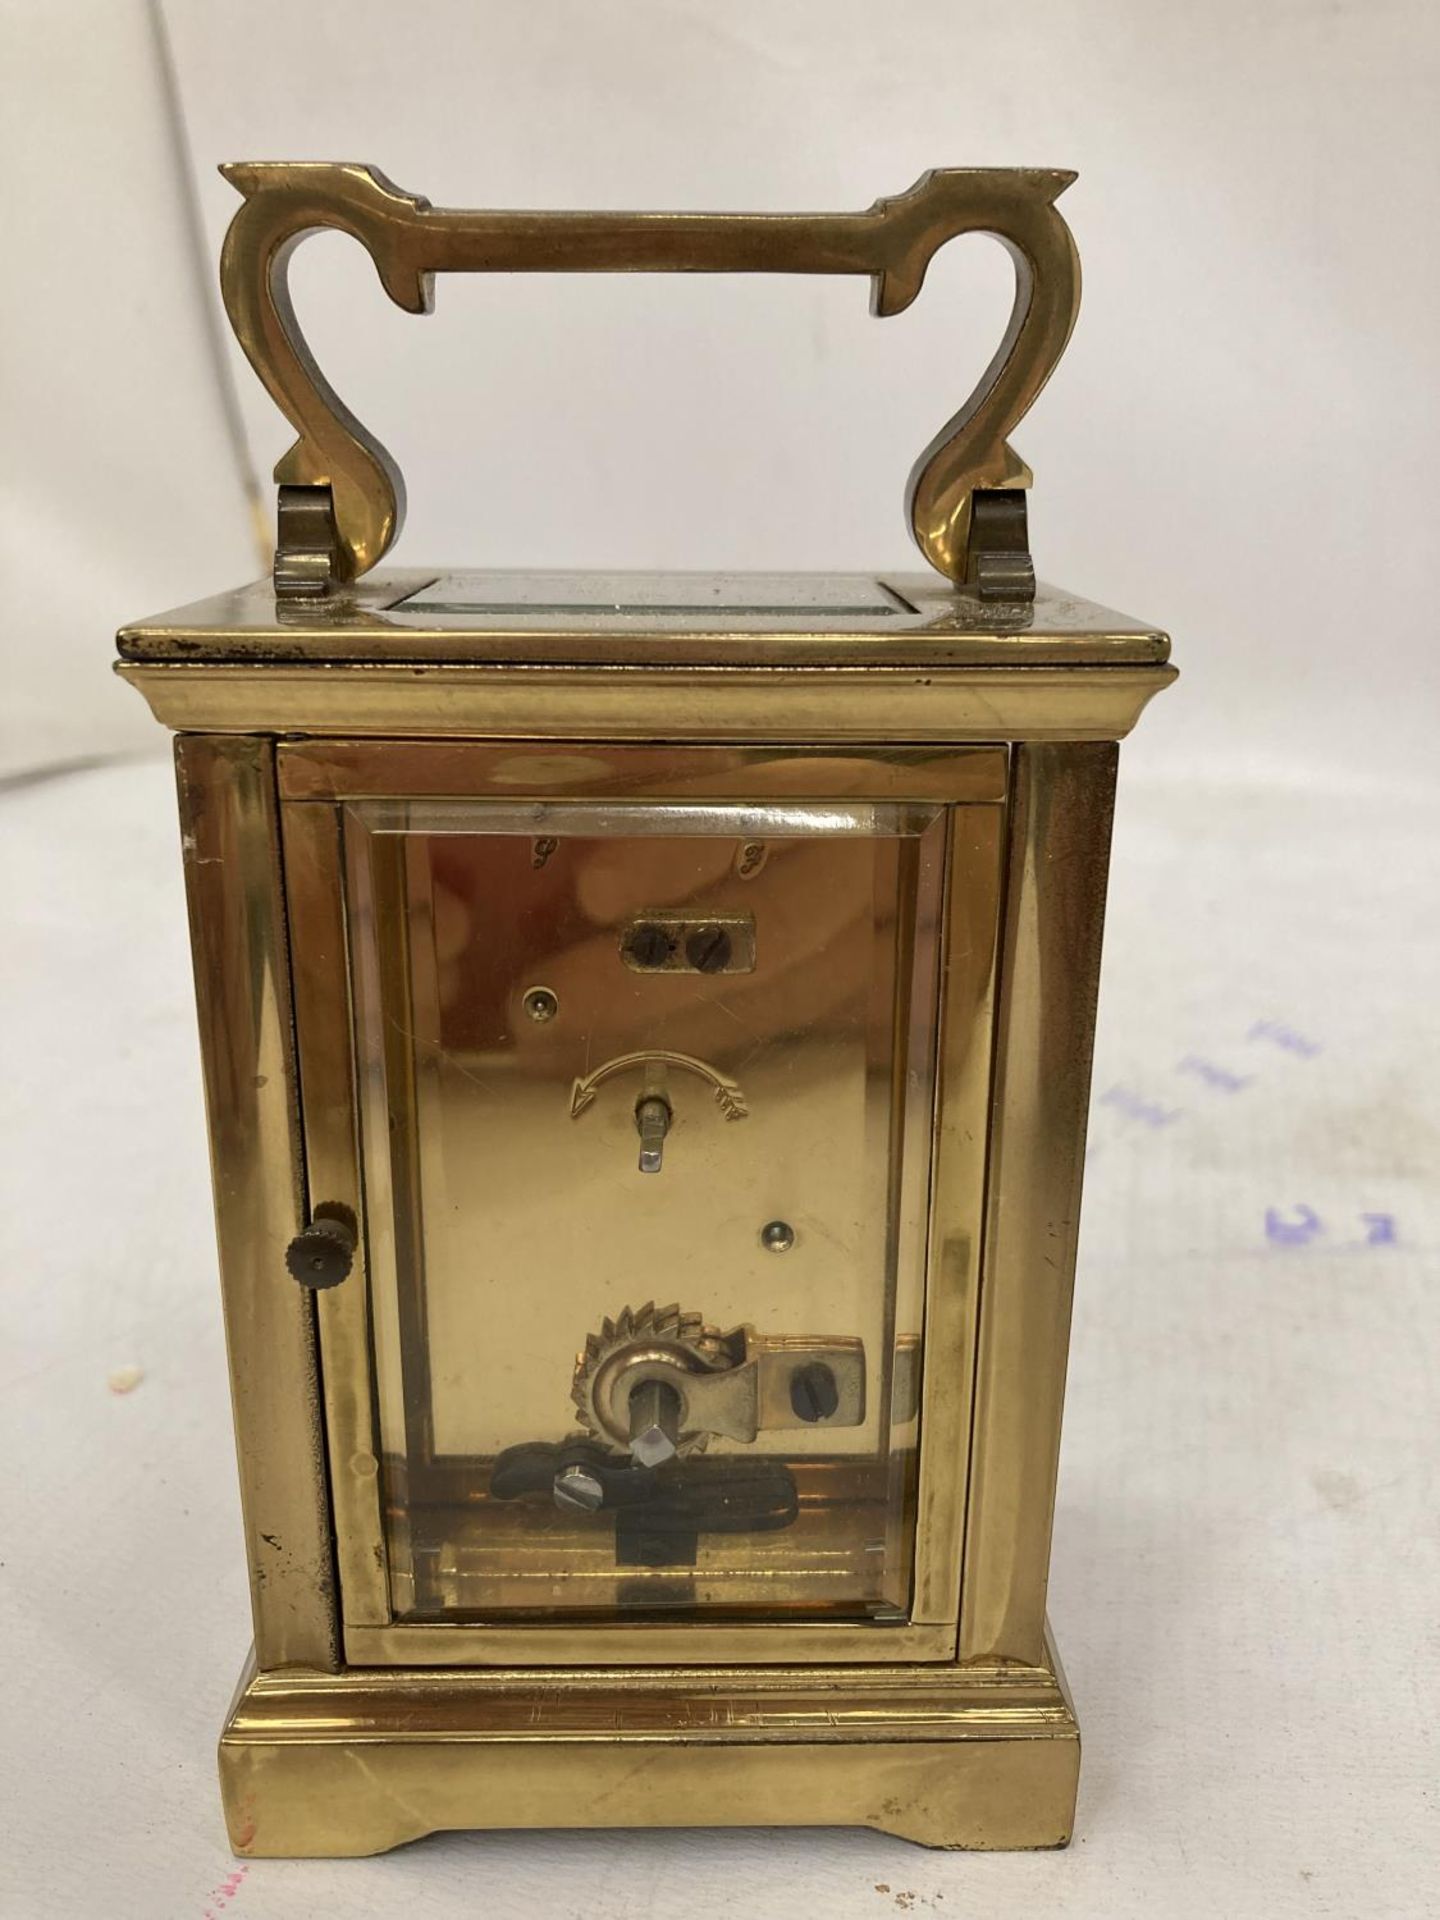 A VINTAGE BRASS CARRIAGE CLOCK WITH BEVELLED GLASS PANELS, GLASS SERVING BOWLS IN A GILT HOLDER, A - Image 3 of 4